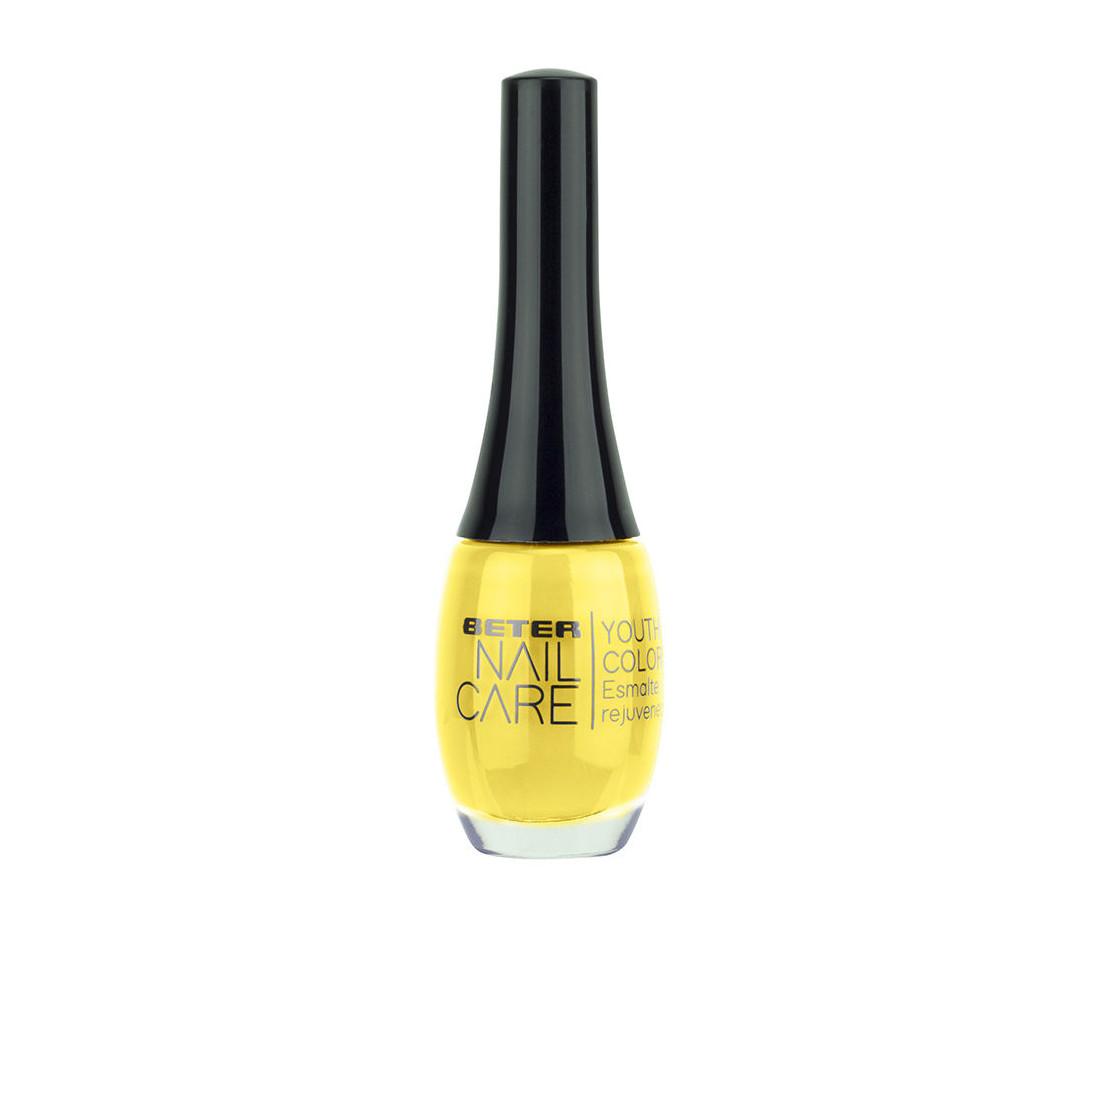 NAIL CARE YOUTH COLOR 240-pillola energetica 11 ml